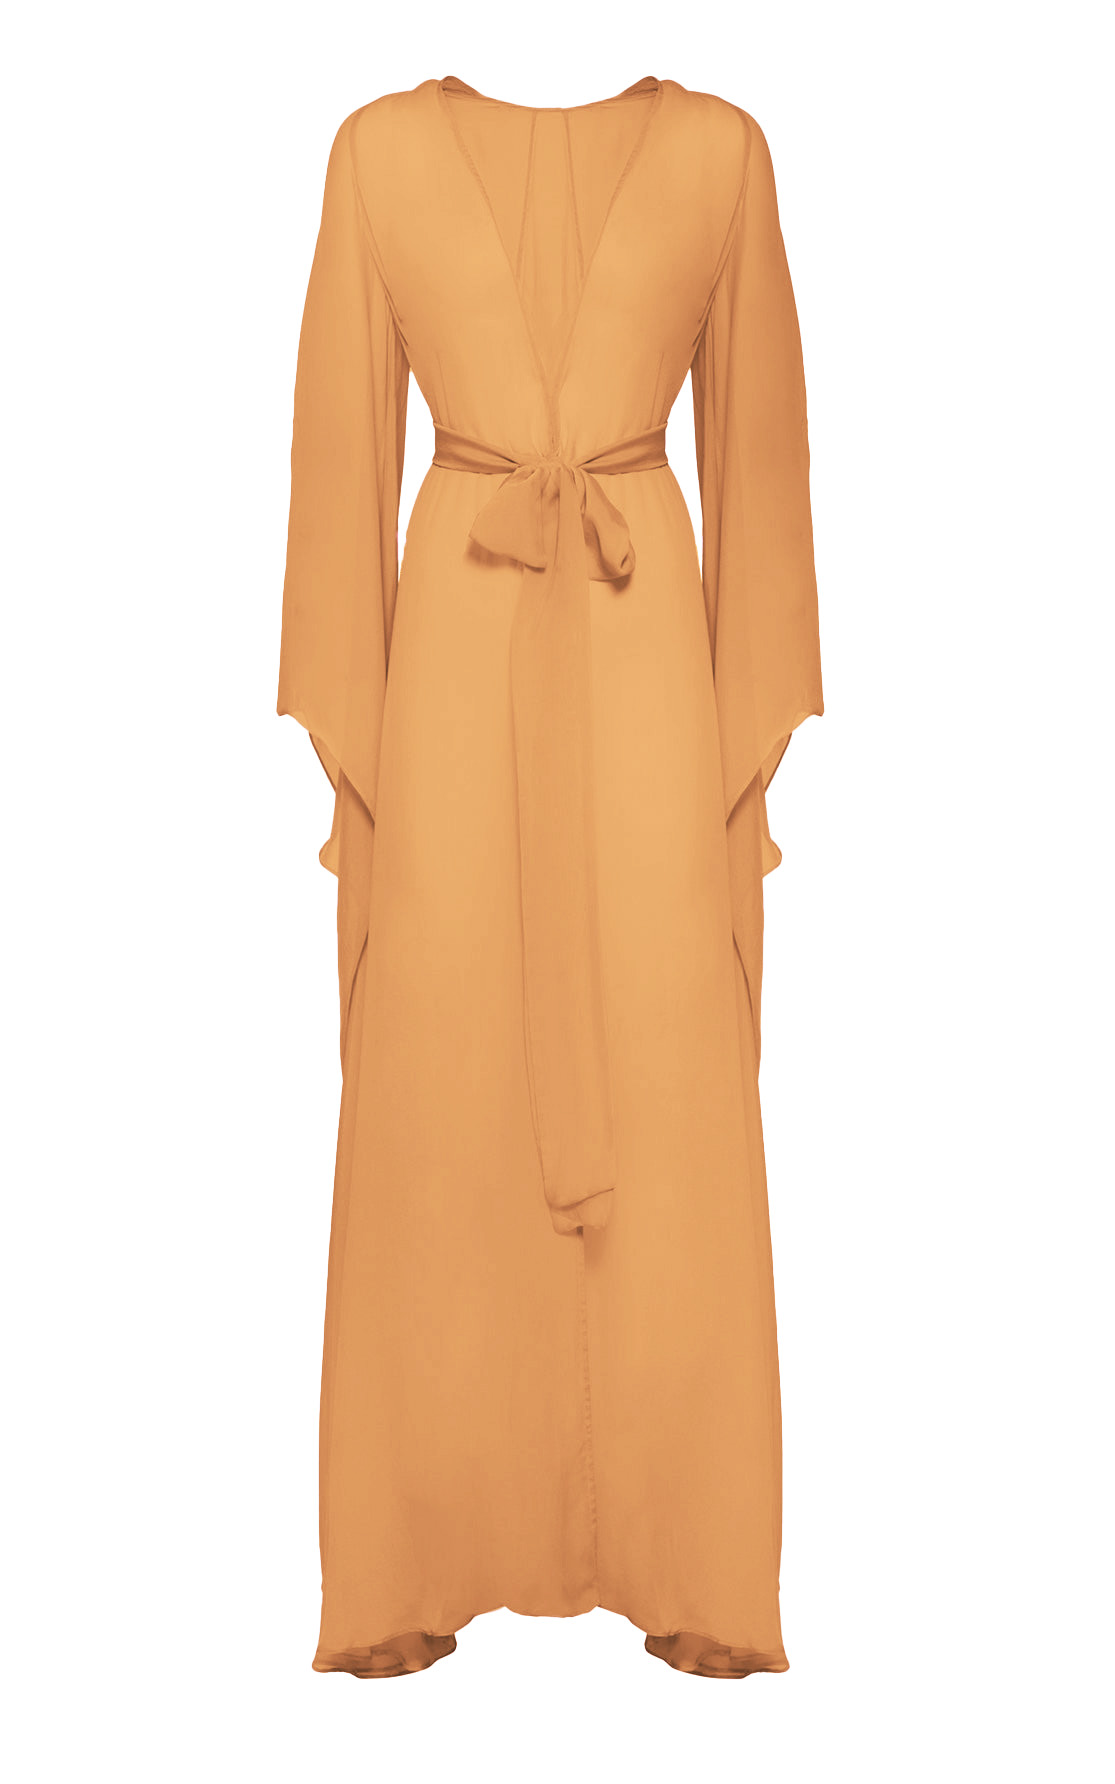 robe 2 nude front